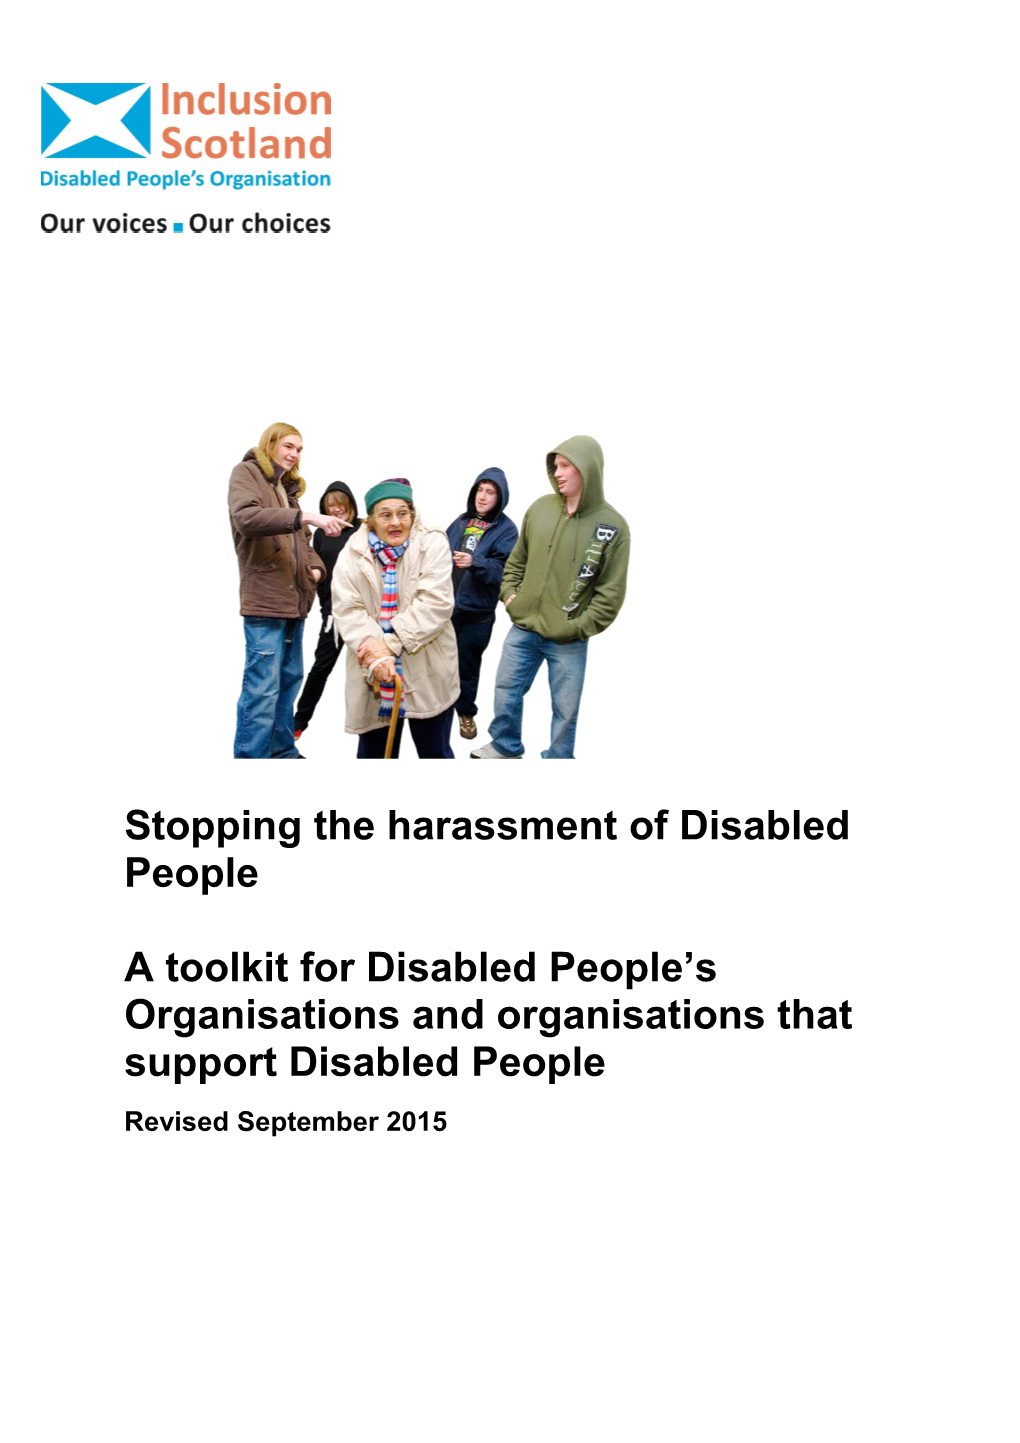 Stopping the Harassment of Disabled People